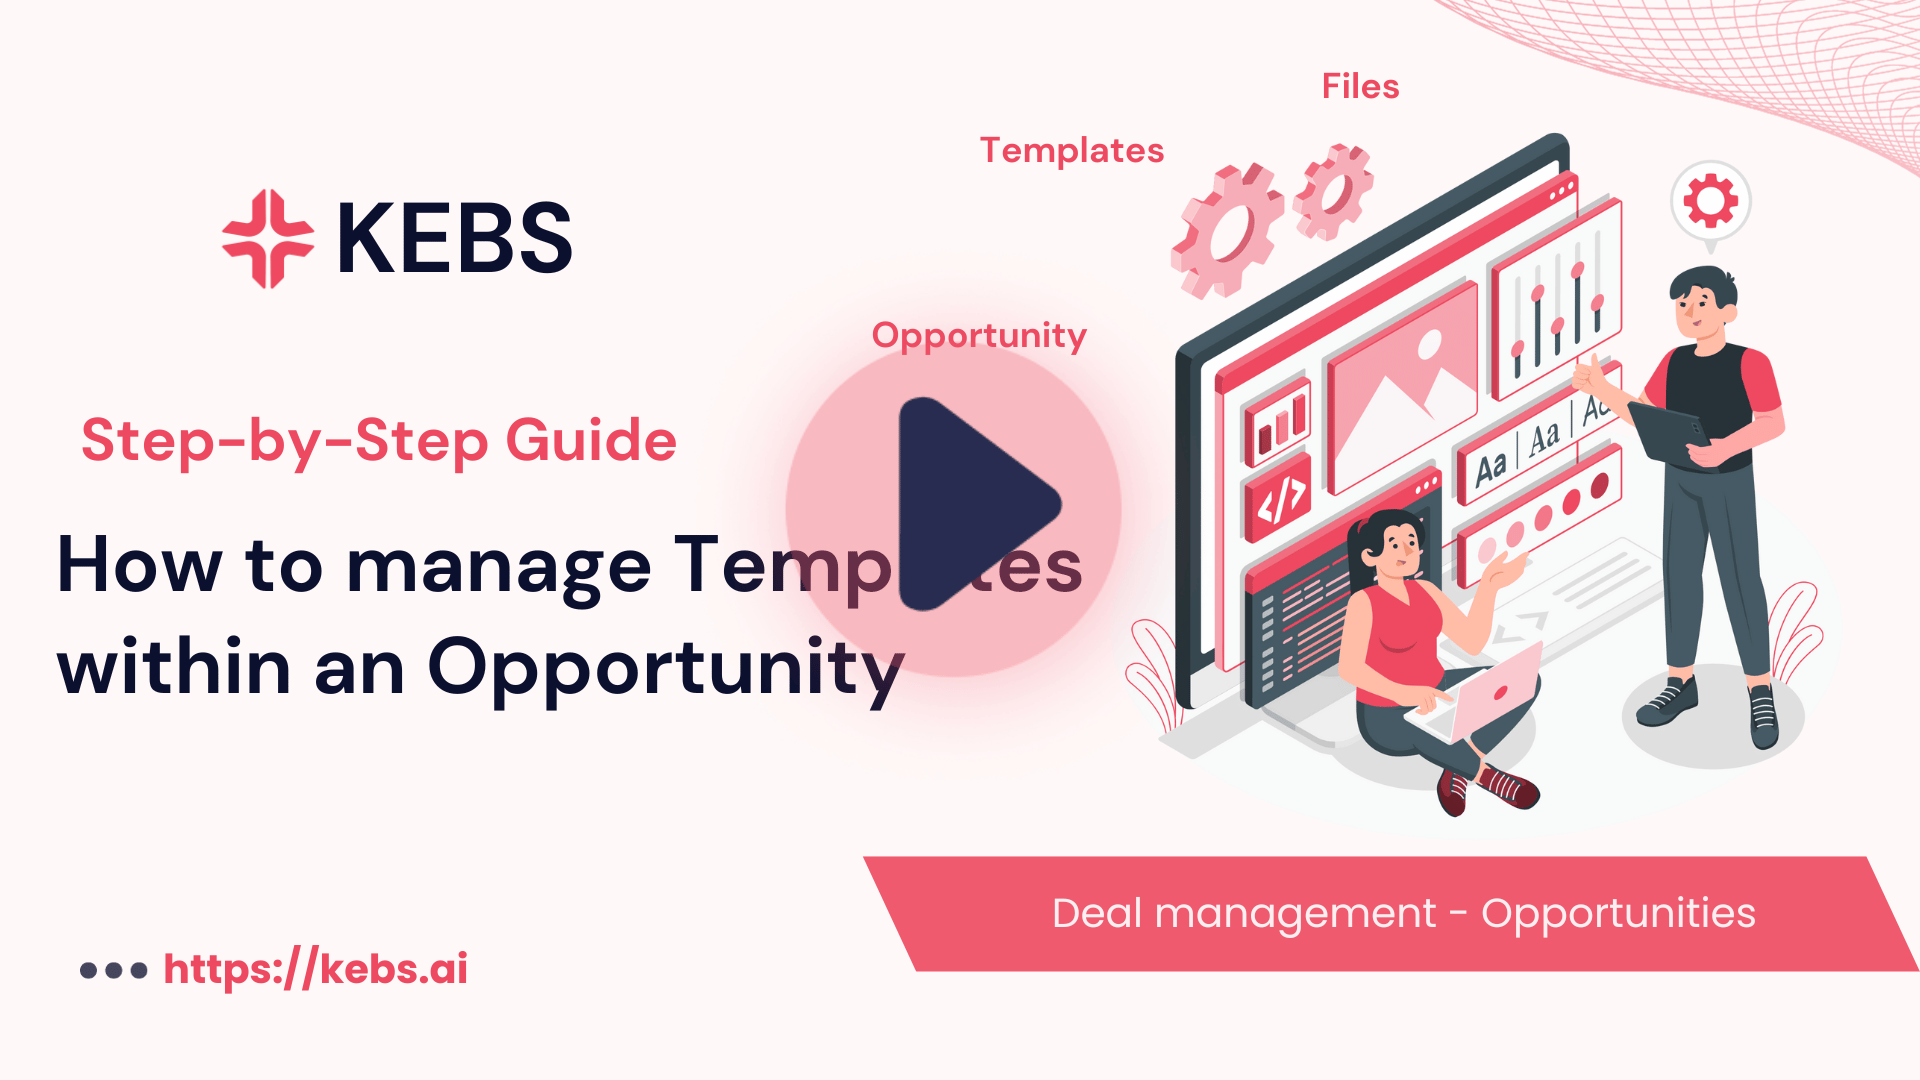 How to manage Templates within an Opportunity